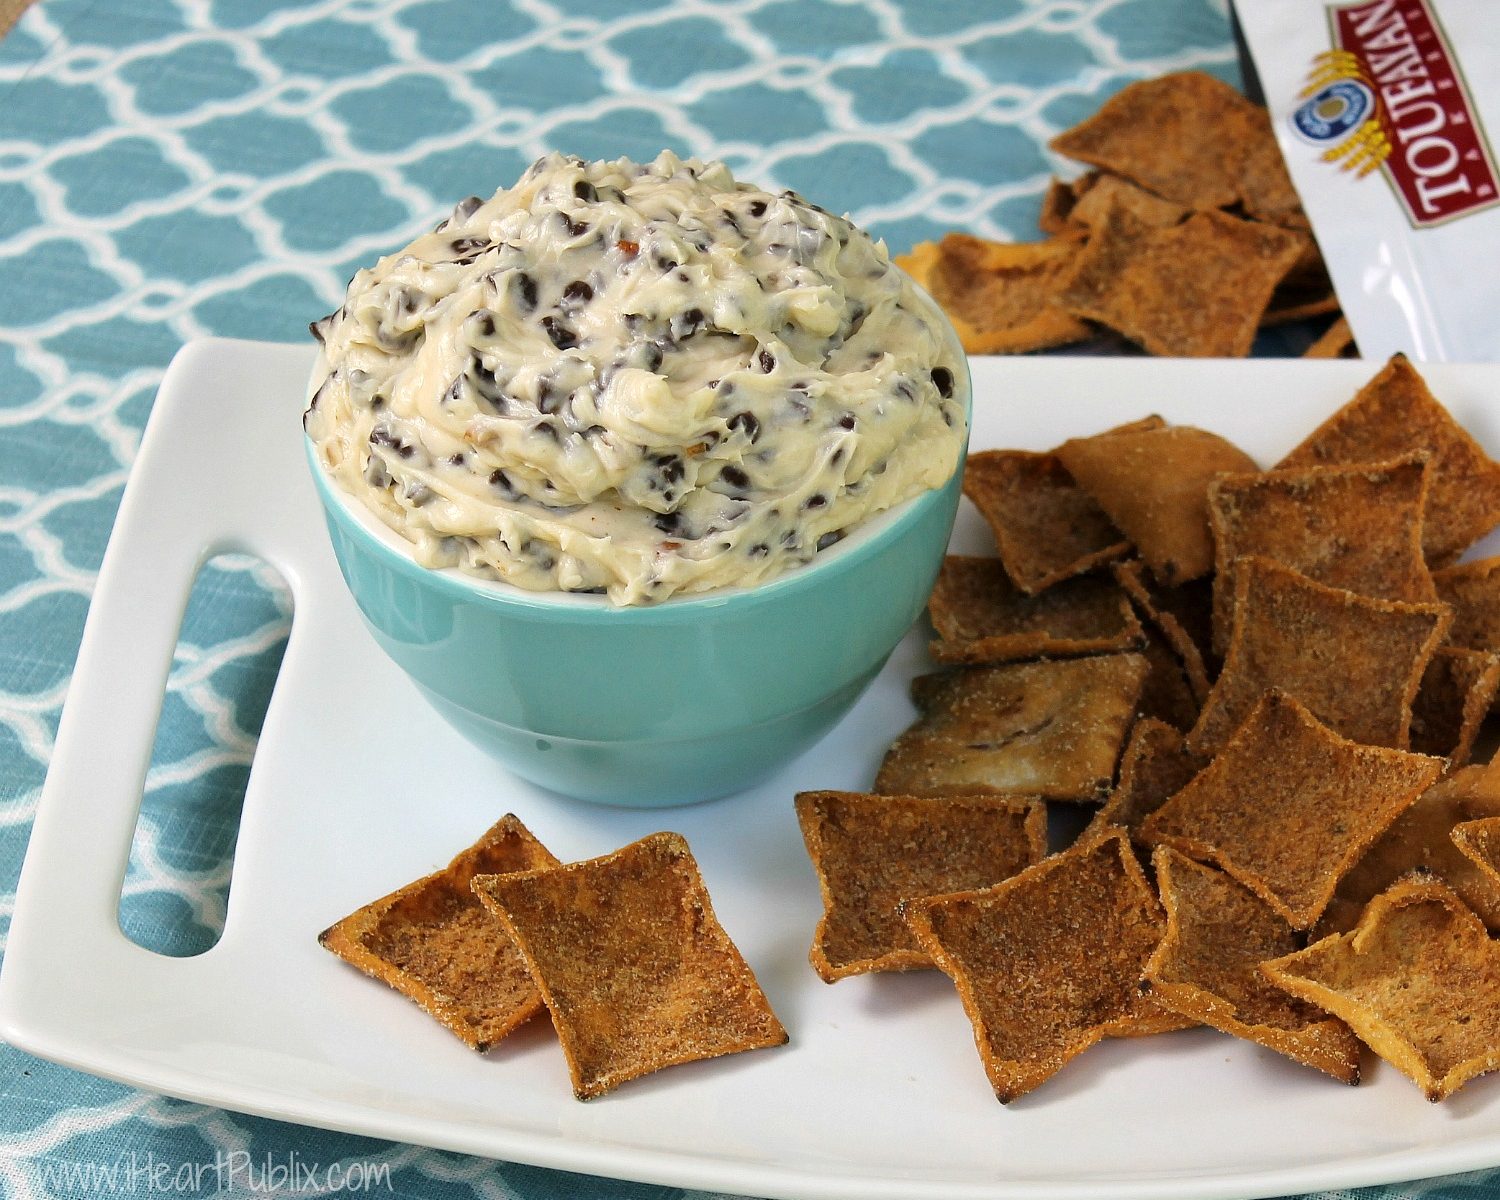 Chocolate Chip Pecan Cookie Dough Dip & Reminder To Get Great Deals On Toufayan Products At Publix!